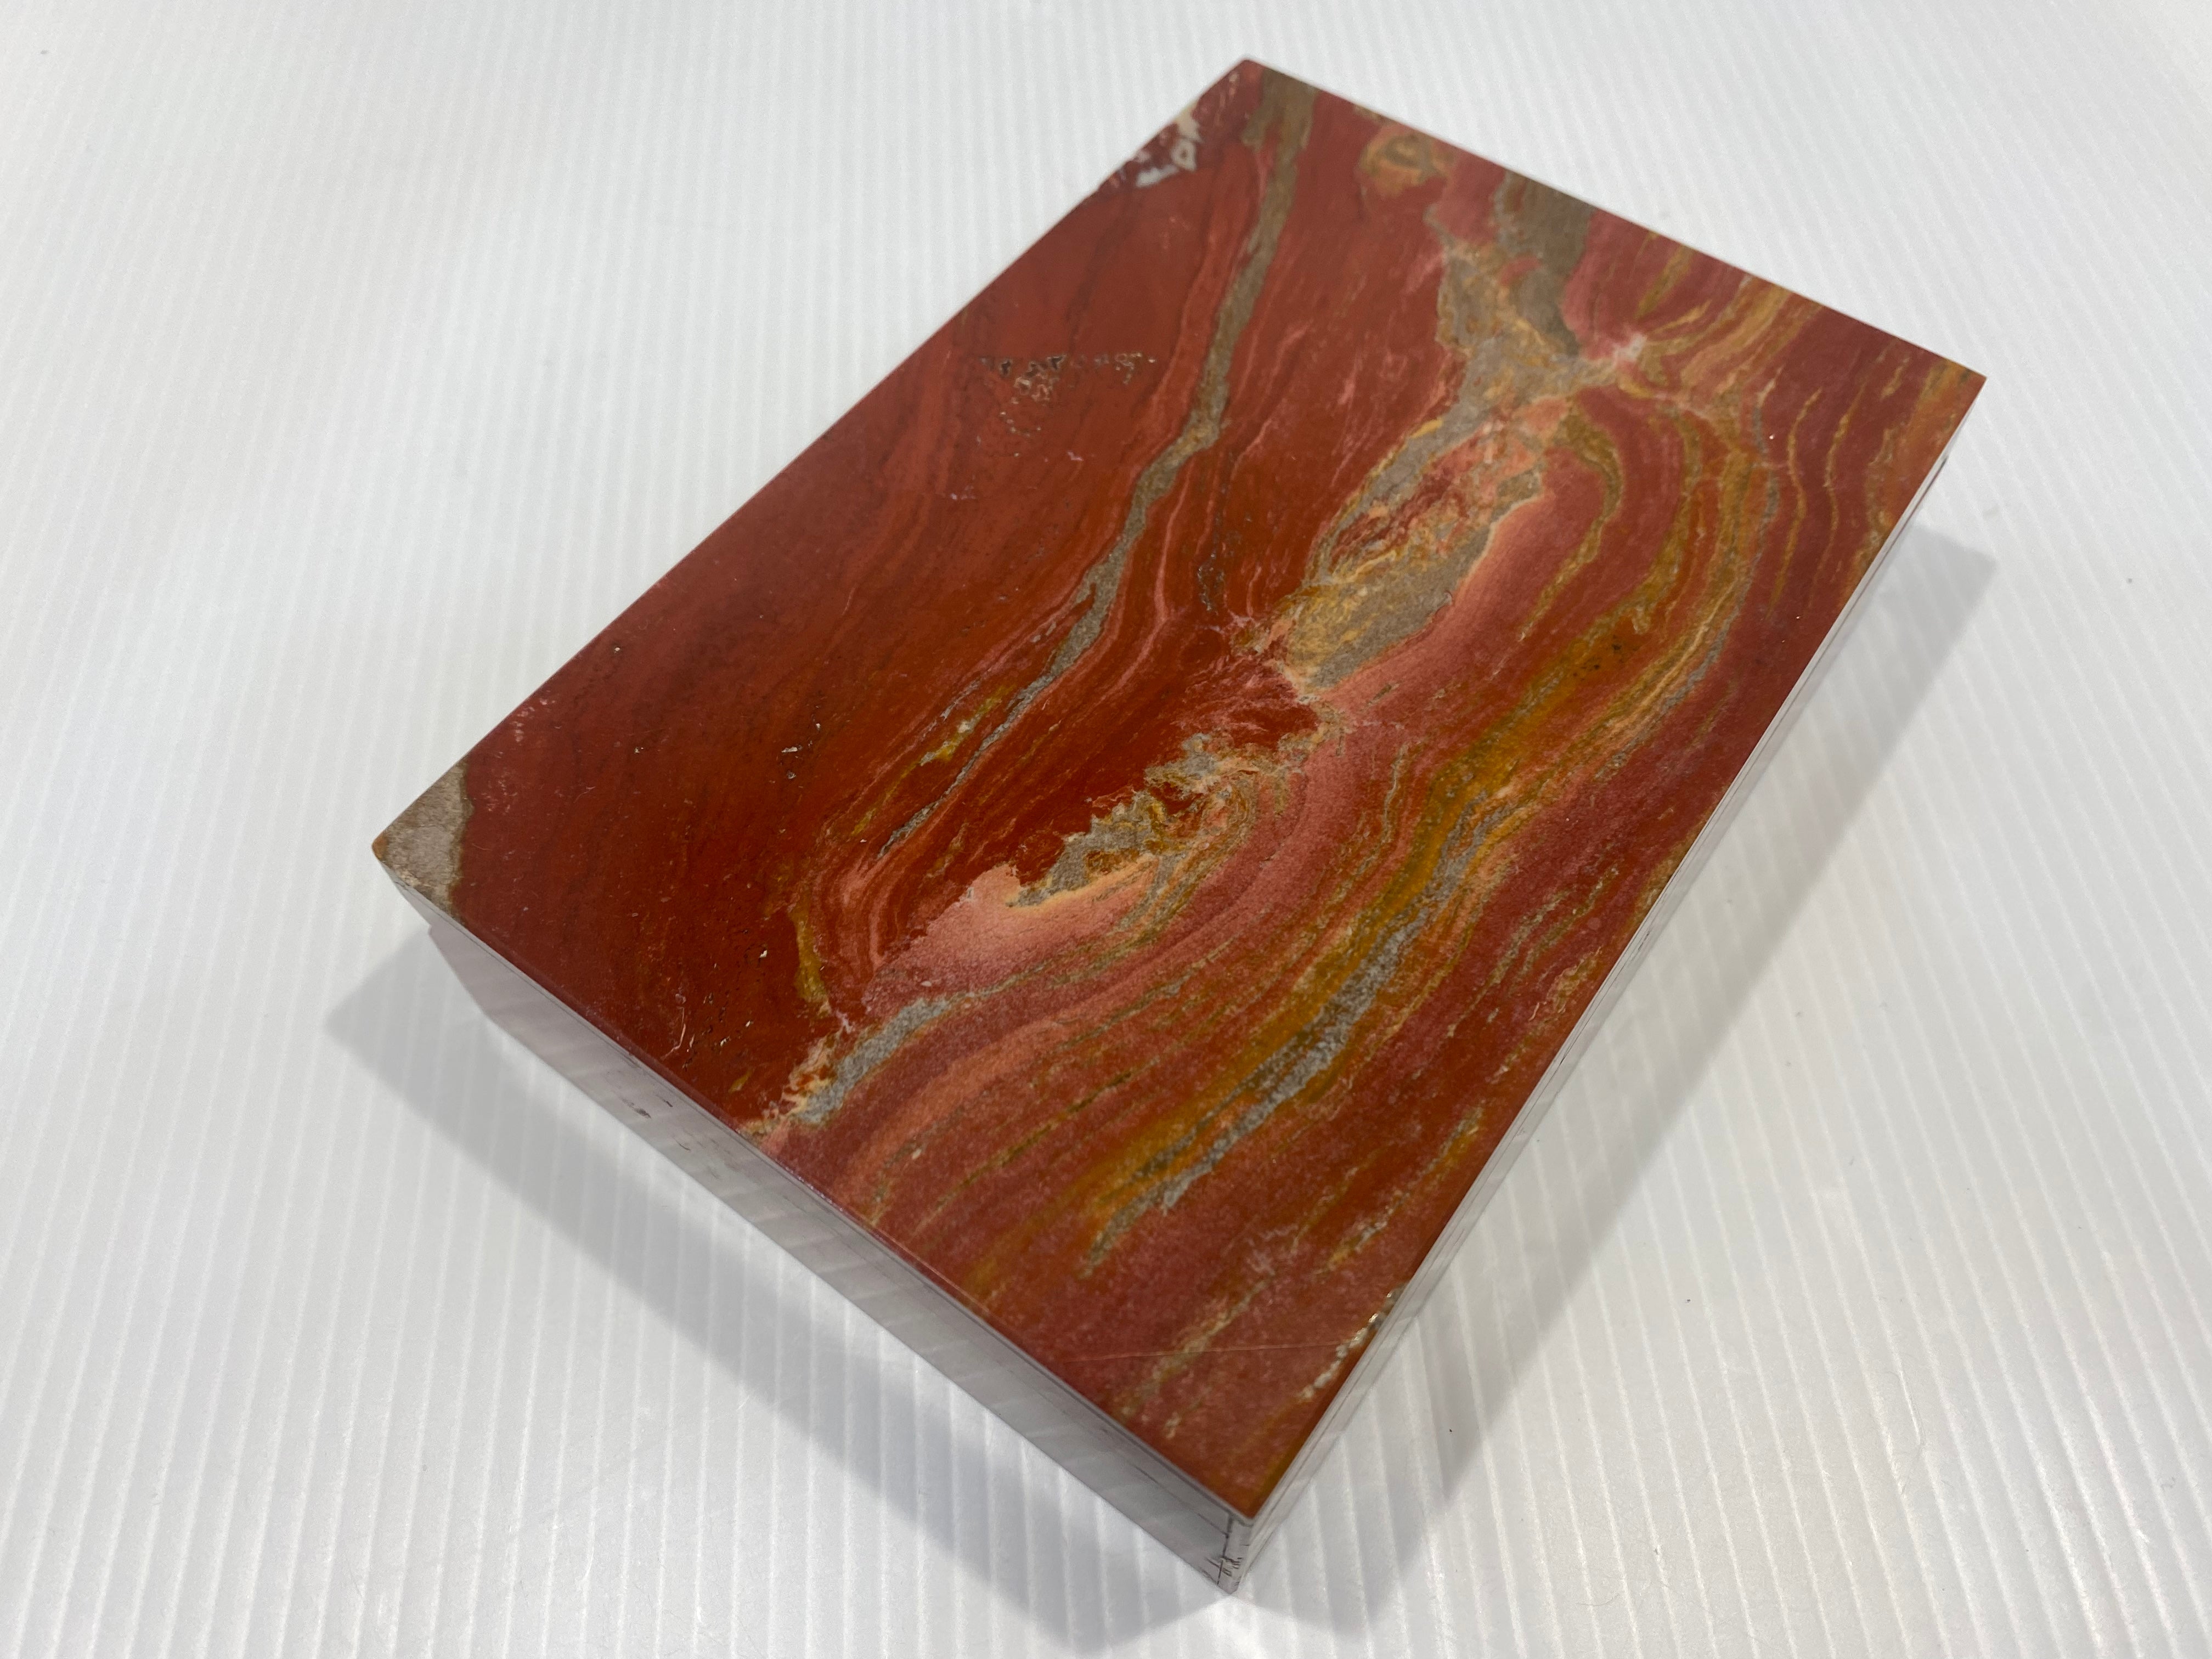 jewelry box made of red obsidian